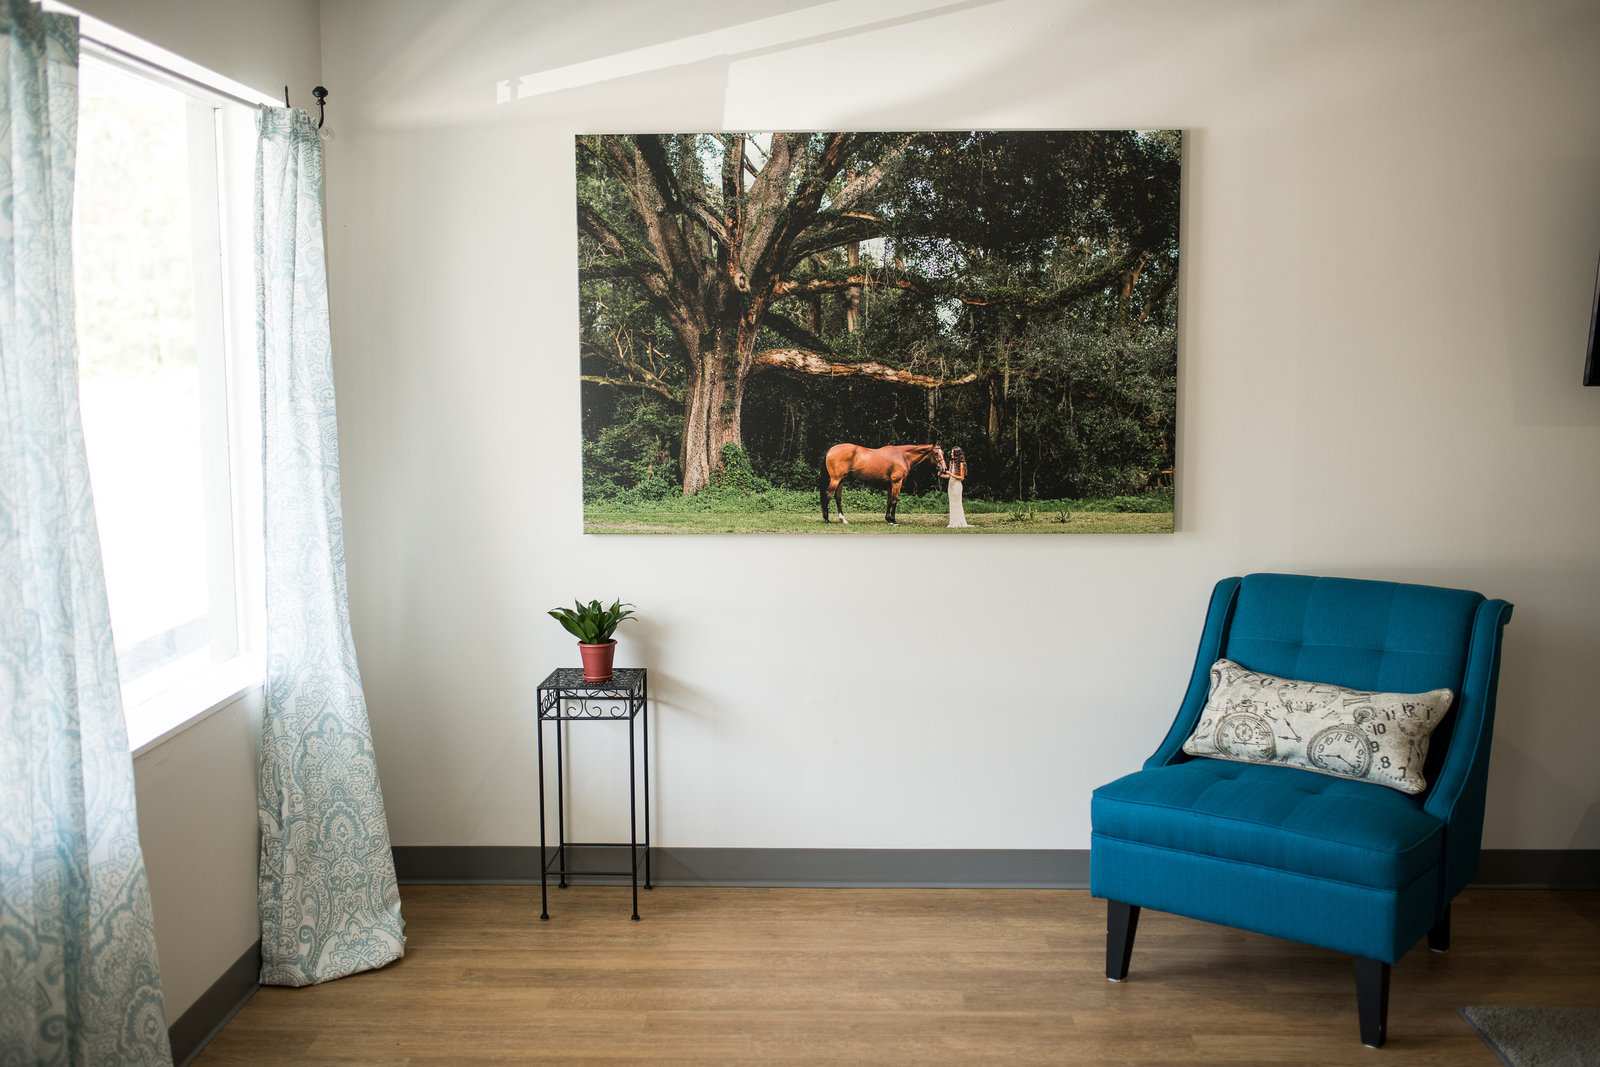 Beautiful wall art for your home with your horse